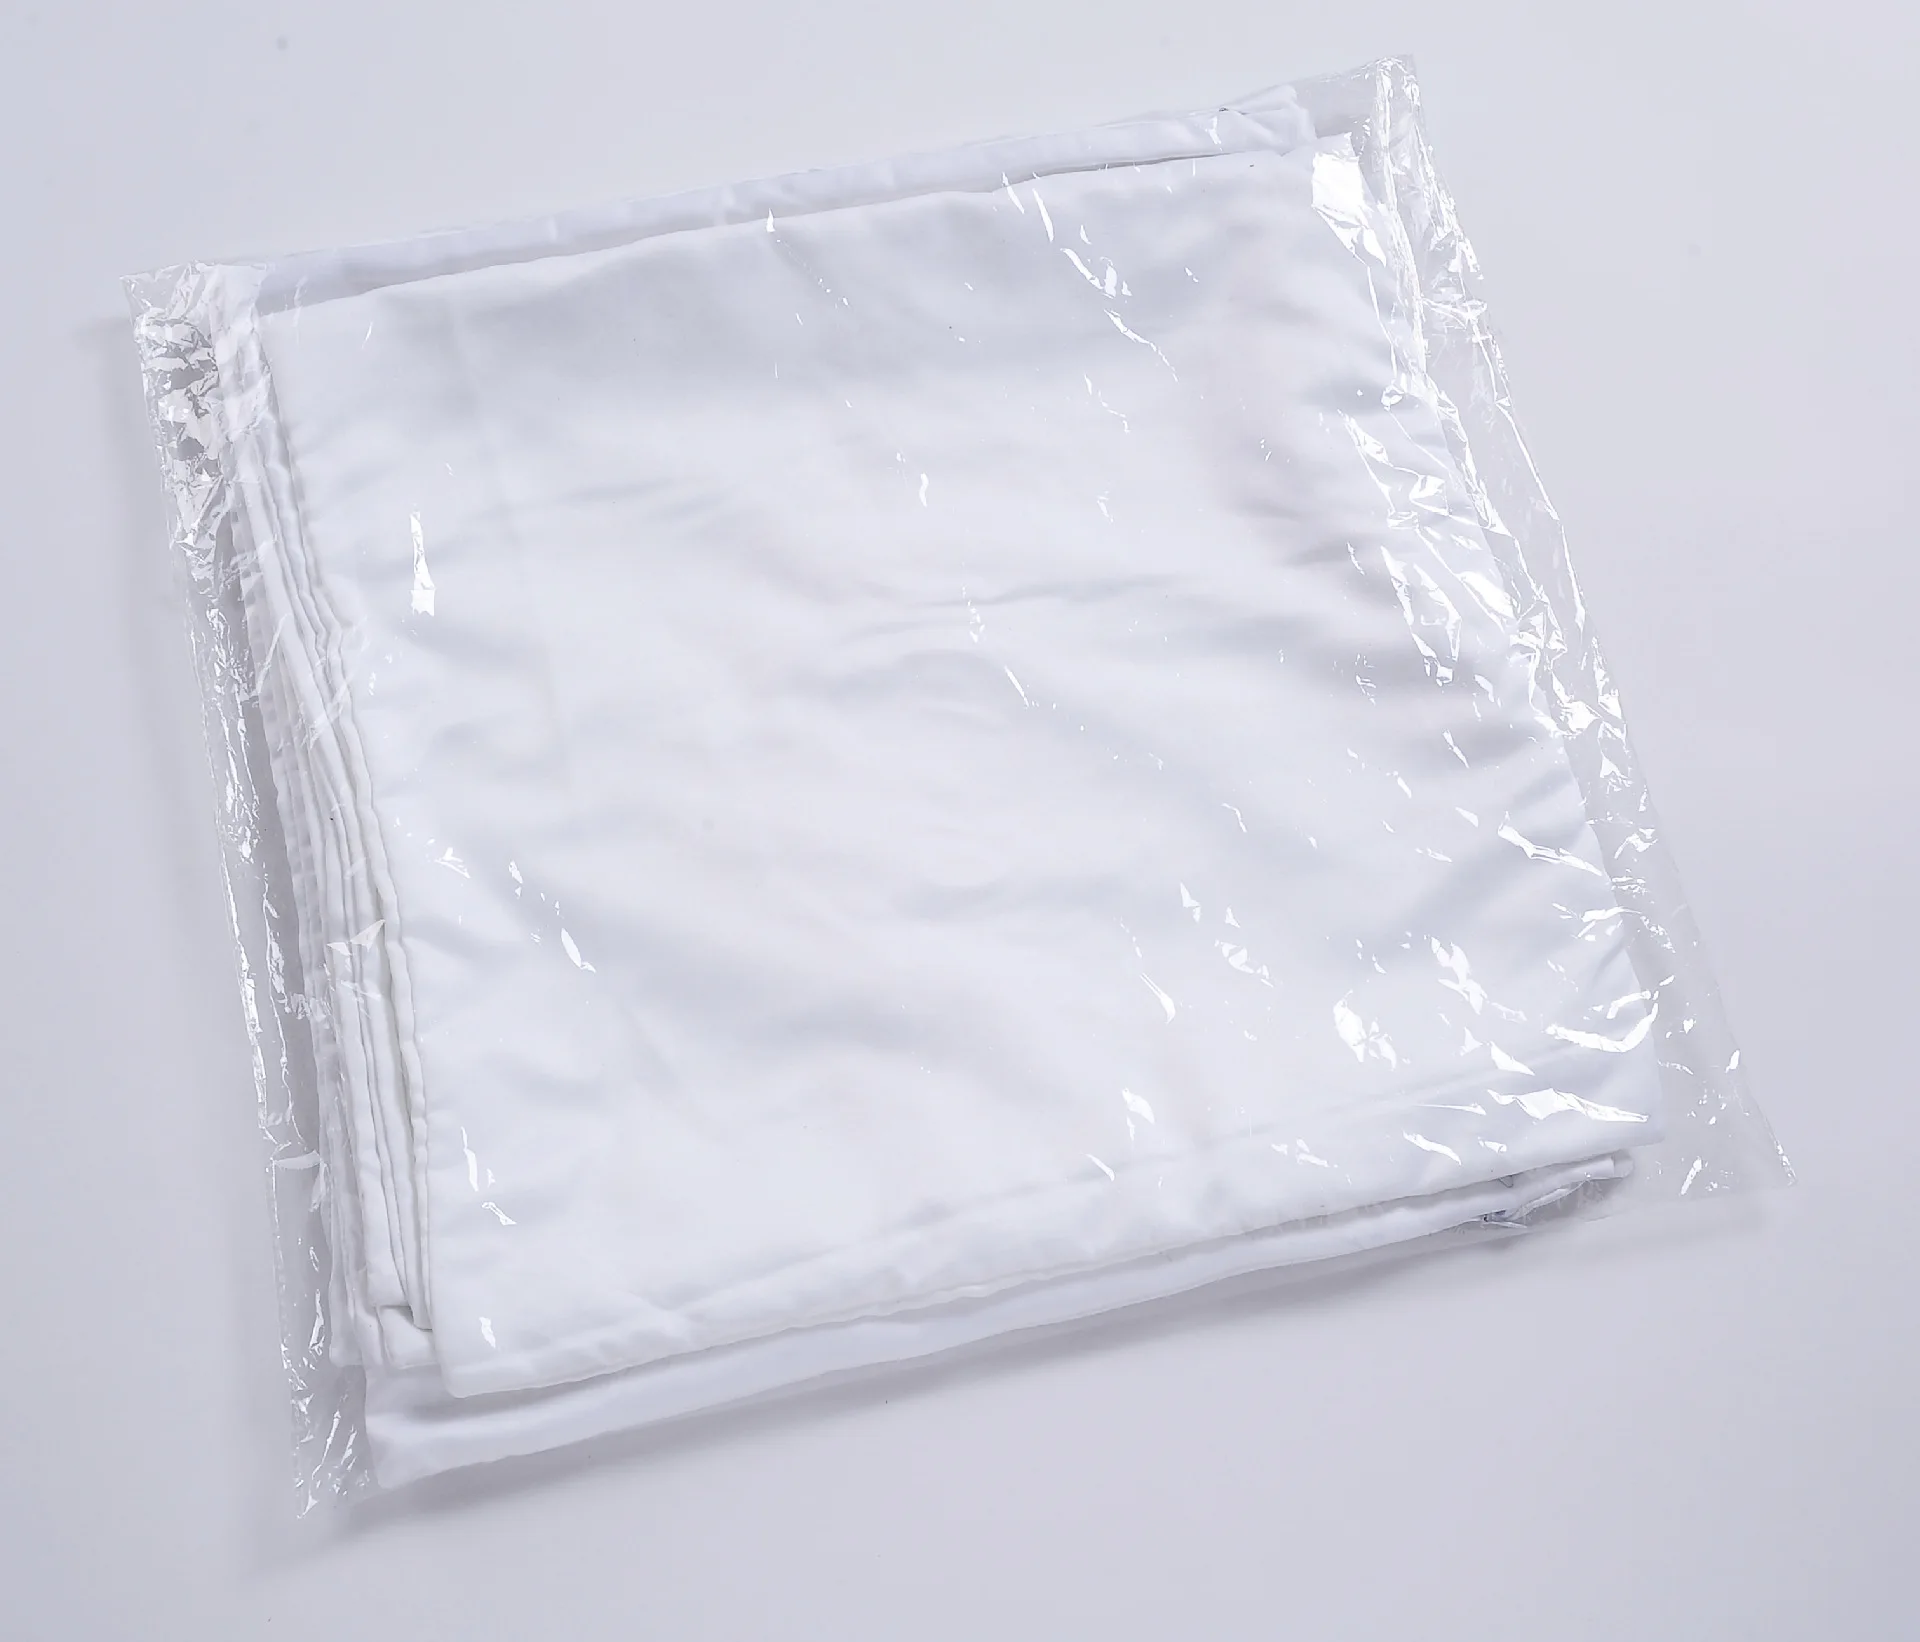 FREE SHIPPING 10pcs/lot 40x40cm Sublimation Blank pillowcase Polyester Peach Skin for Sublimation Transfer Printing DIY Gift free shipping 10pcs 18 22 0 2cm blank sublimation pads rectangle shape high quality diy printing transfer mouse pad heat press